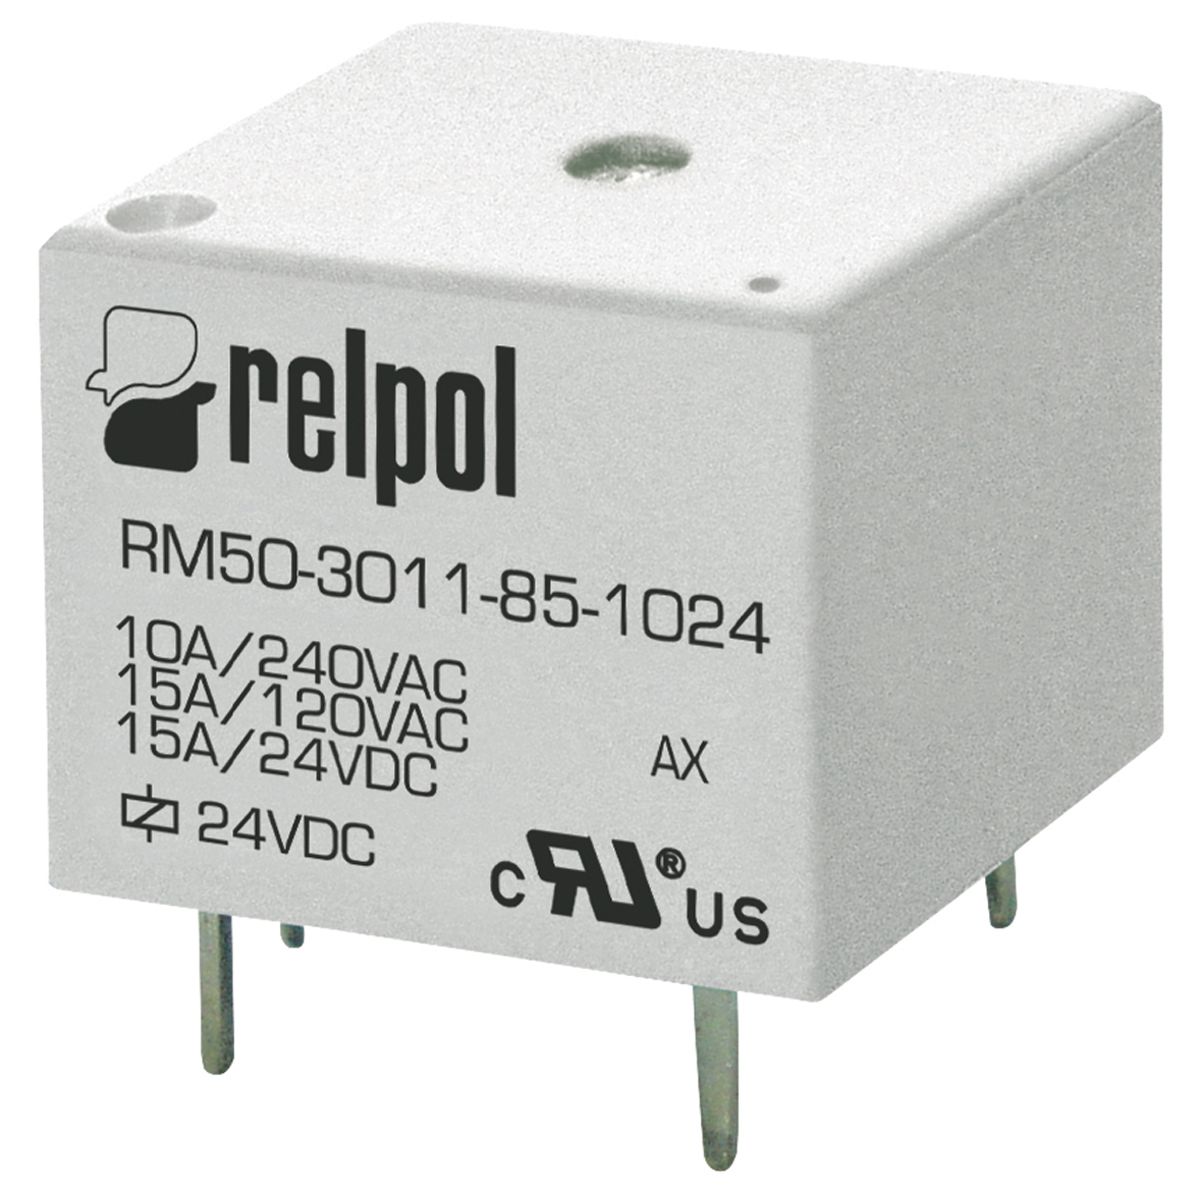 Relpol PCB Mount Power Relay, 24V dc Coil, 15A Switching Current, SPDT